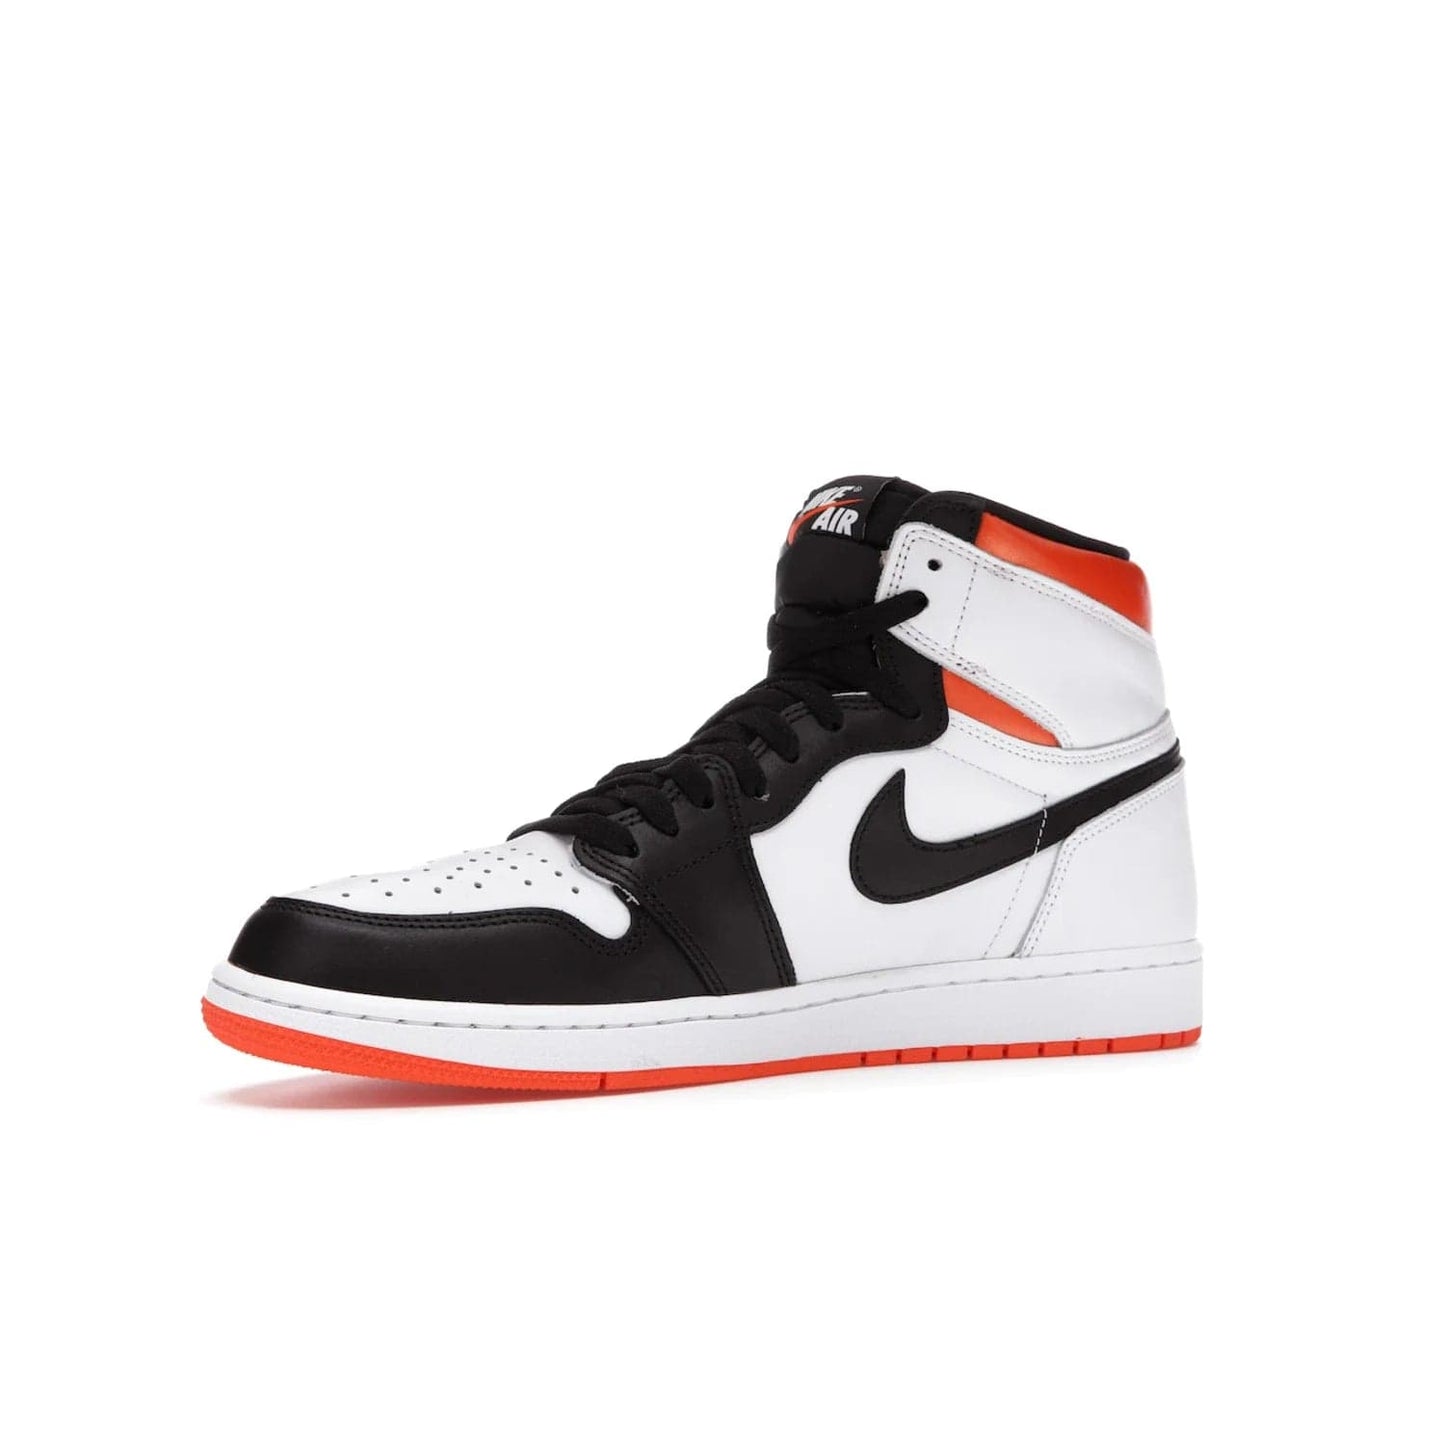 Jordan 1 Retro High Electro Orange - Image 16 - Only at www.BallersClubKickz.com - This Air Jordan 1 Retro High Electro Orange features a white leather upper with black overlays and vibrant Hyper Orange ankle wrap. Turn heads with this iconic design of woven tongue label and sole. Get yours today and add some serious style to your rotation.